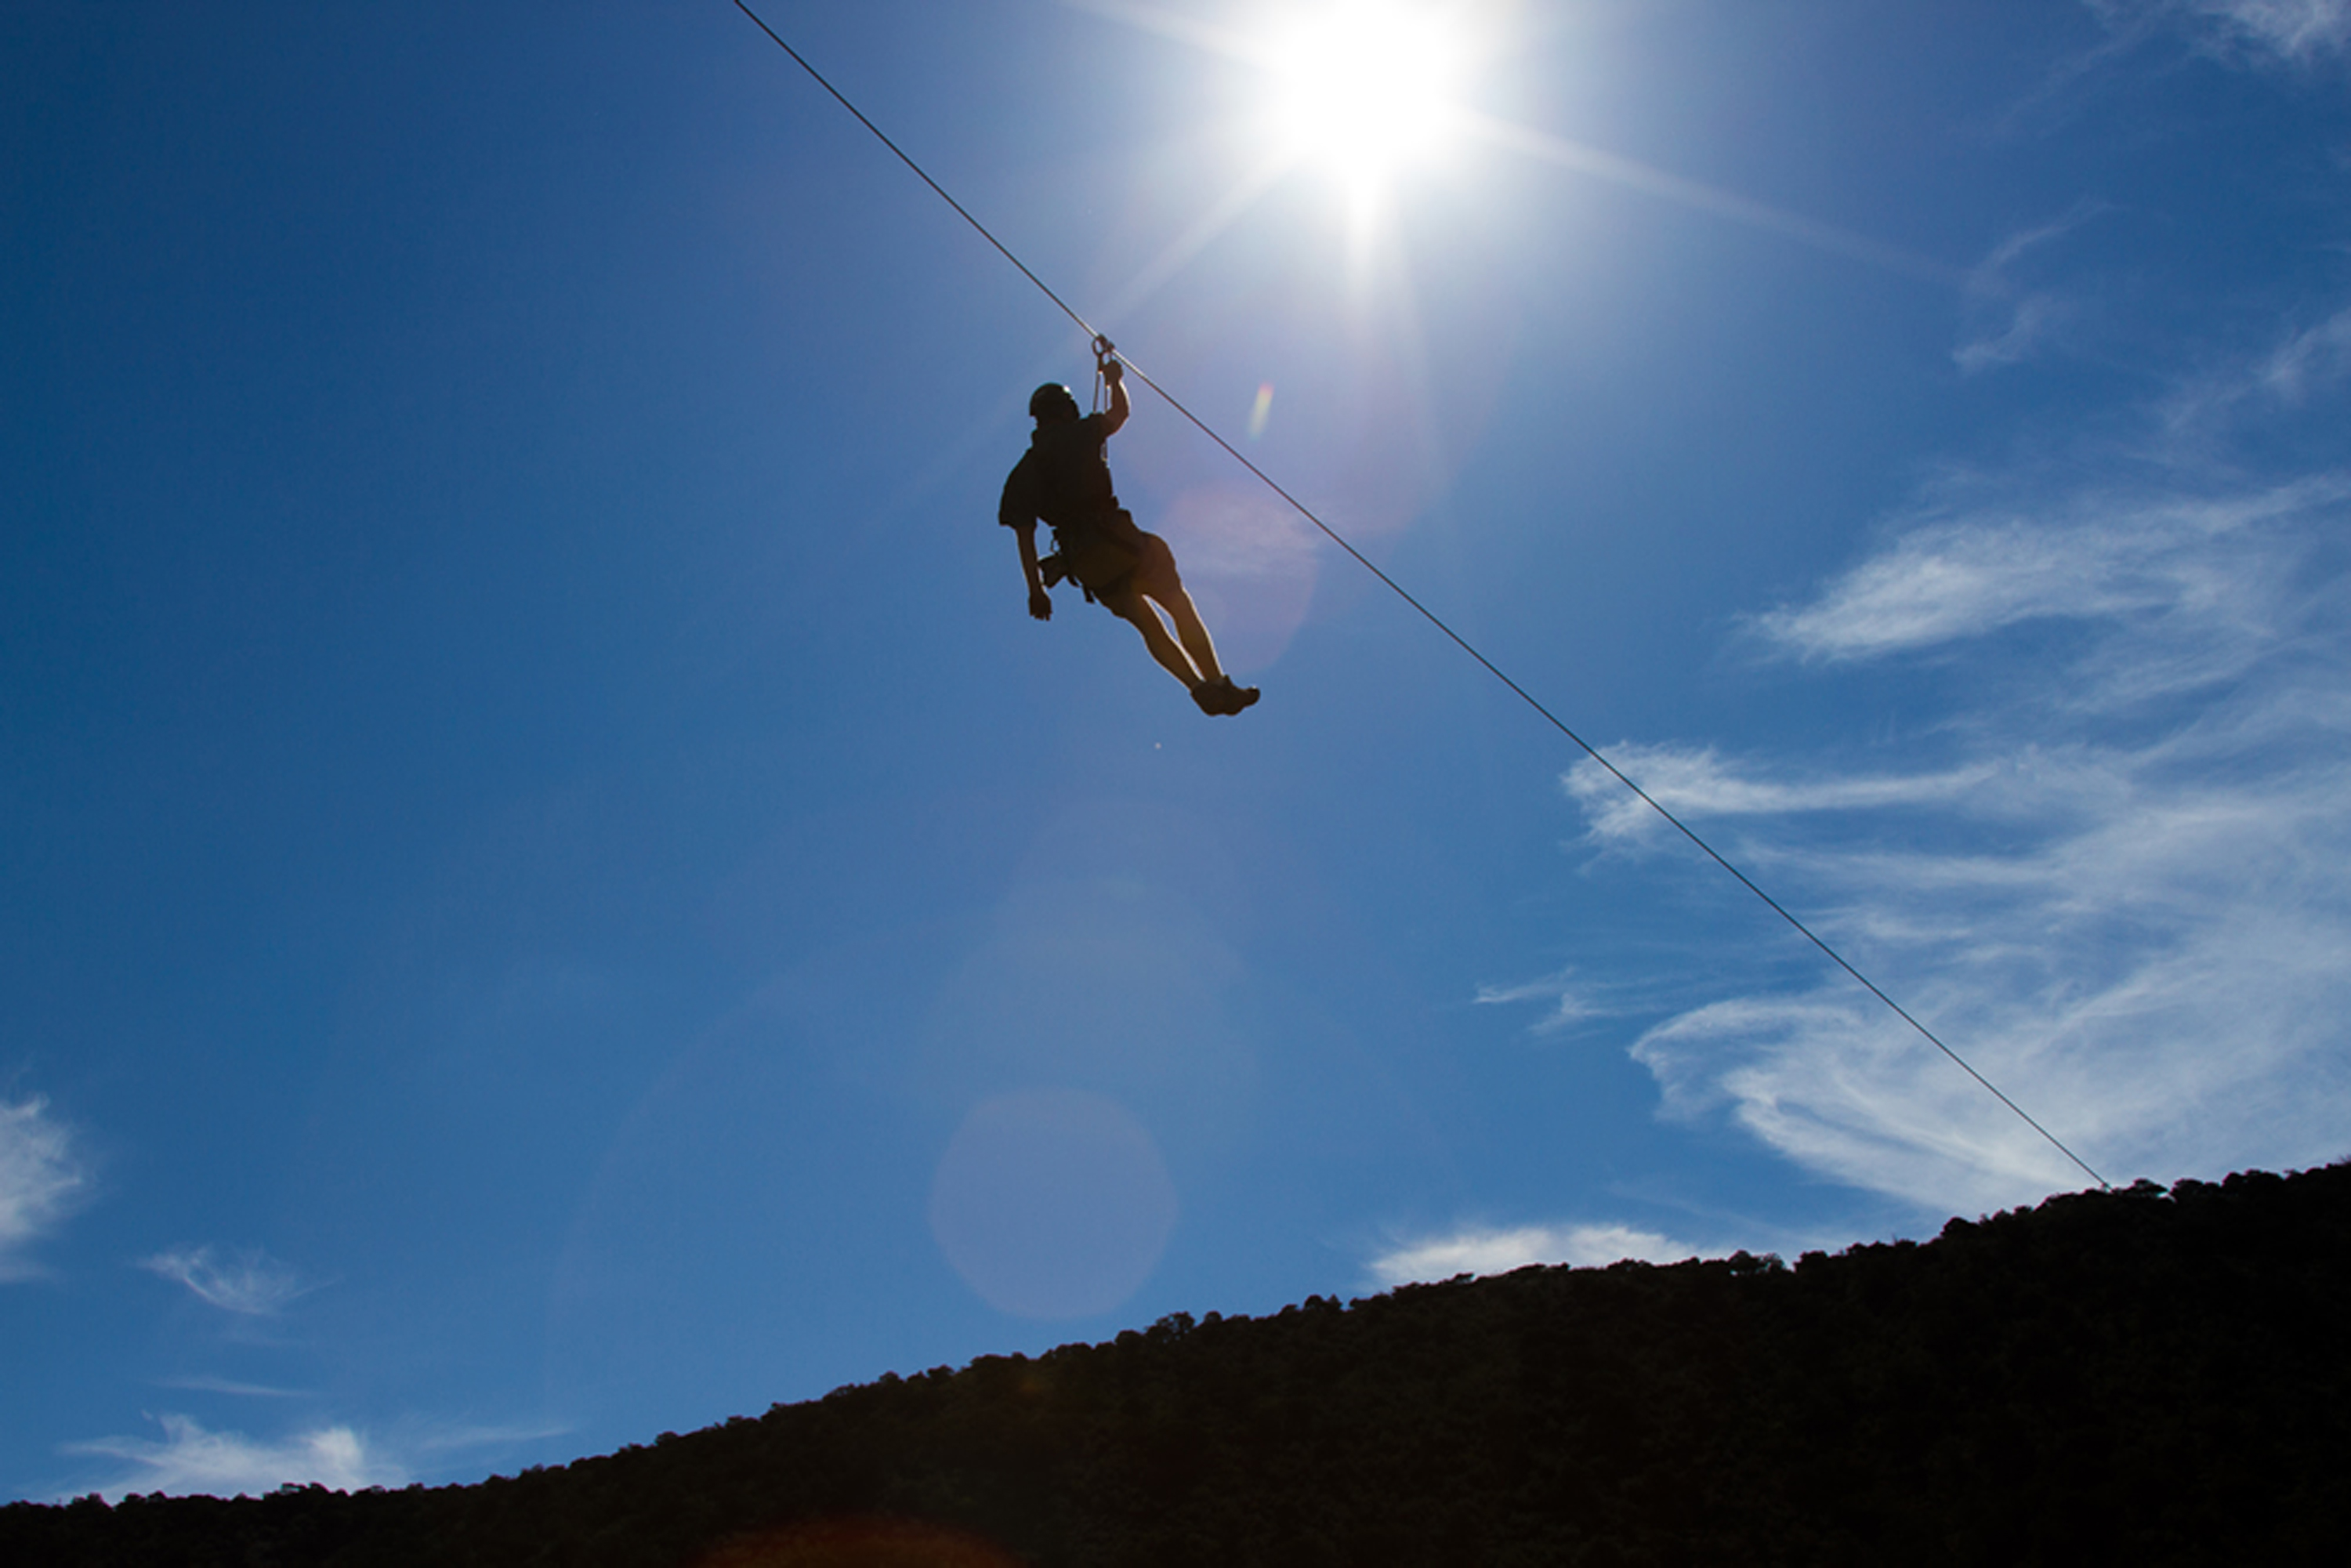 A plunging Vail Valley zipline ride is a part of both of Antlers at Vail’s new late summer Colorado lodging and adventure packages (courtesy of Zip Adventures).